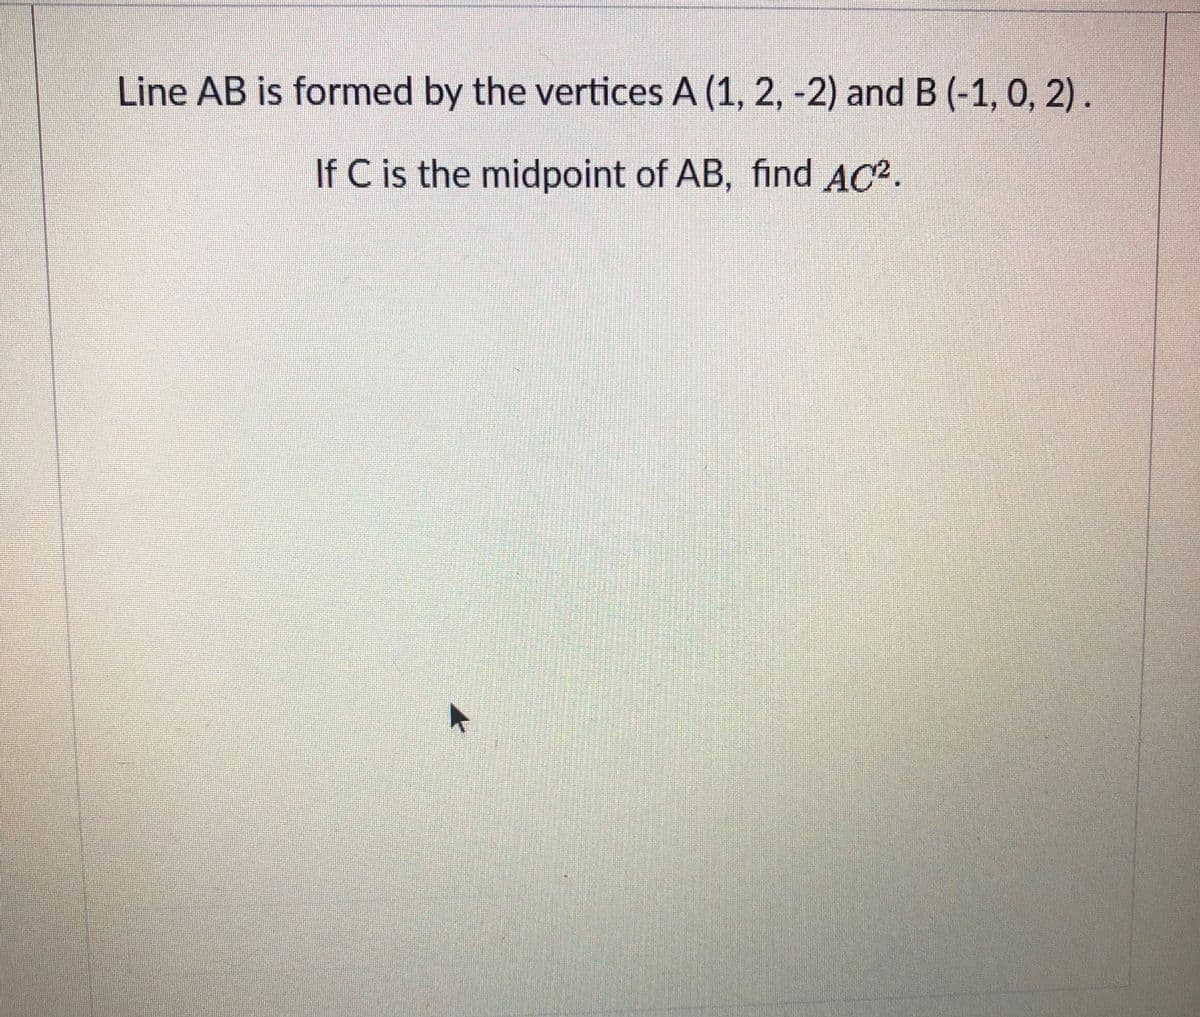 Line AB is formed by the vertices A (1, 2, -2) and B (-1, 0, 2).
If C is the midpoint of AB, find AC2.
